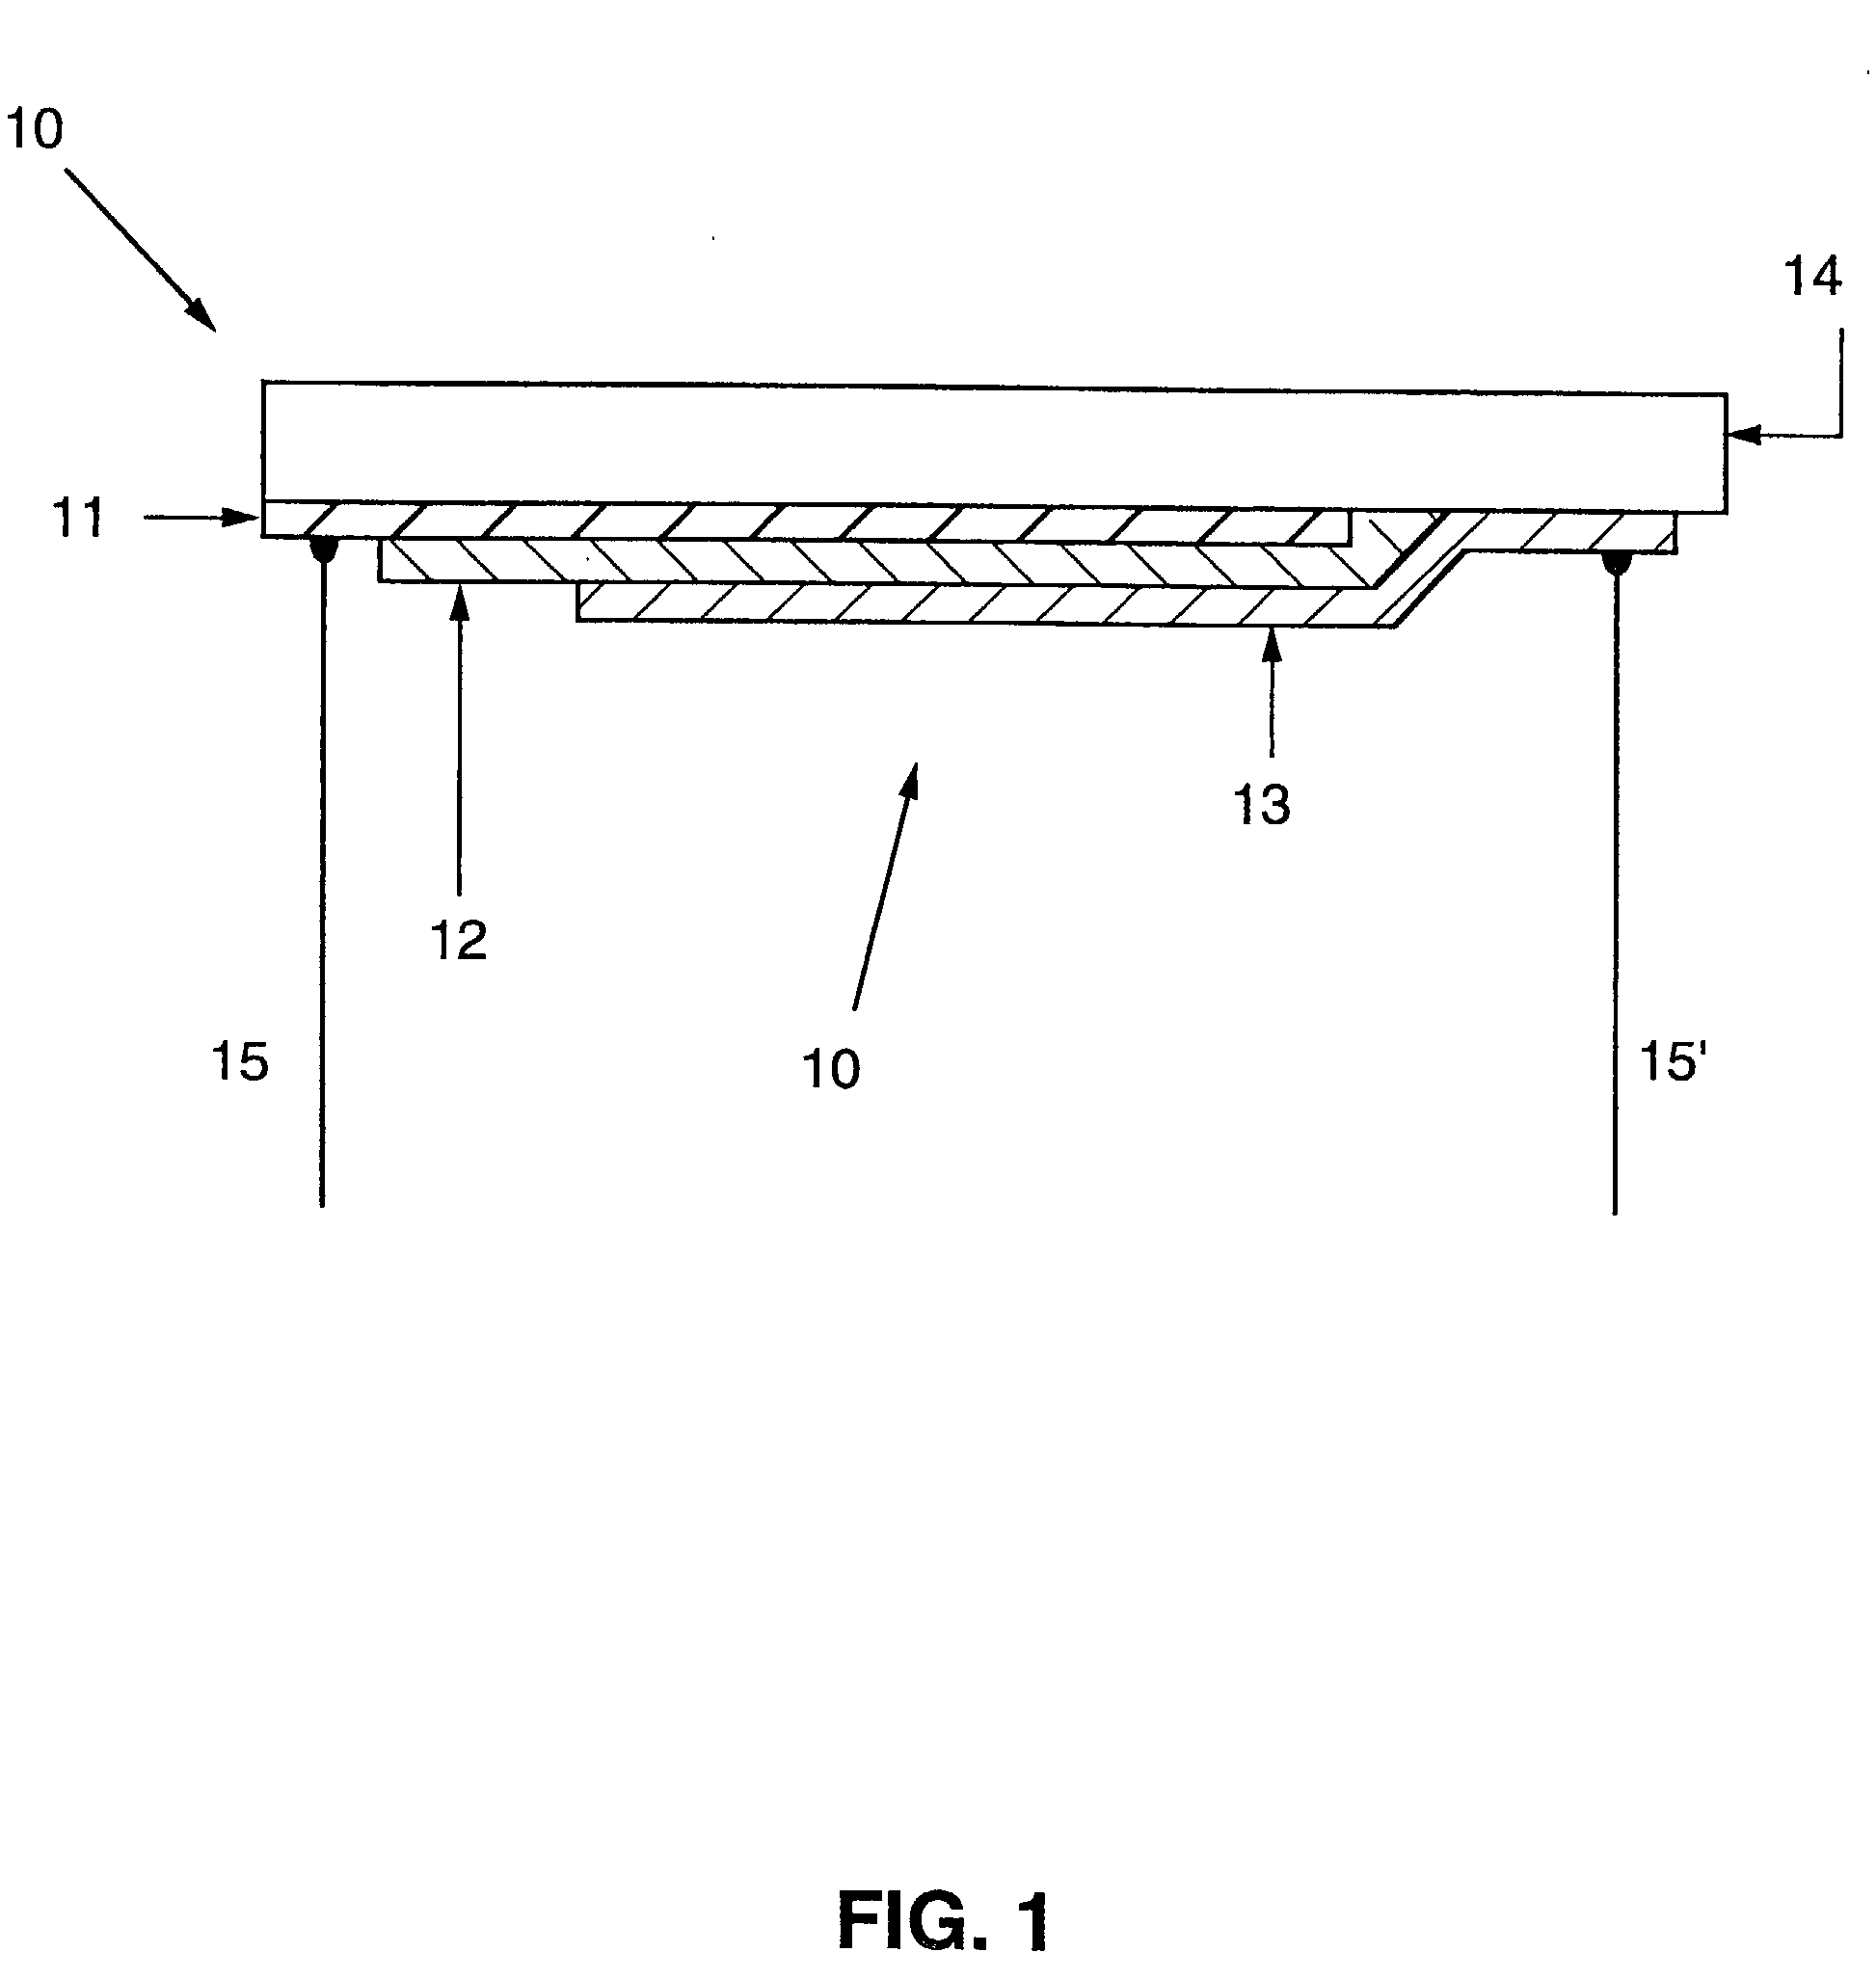 Column-row addressable electric microswitch arrays and sensor matrices employing them